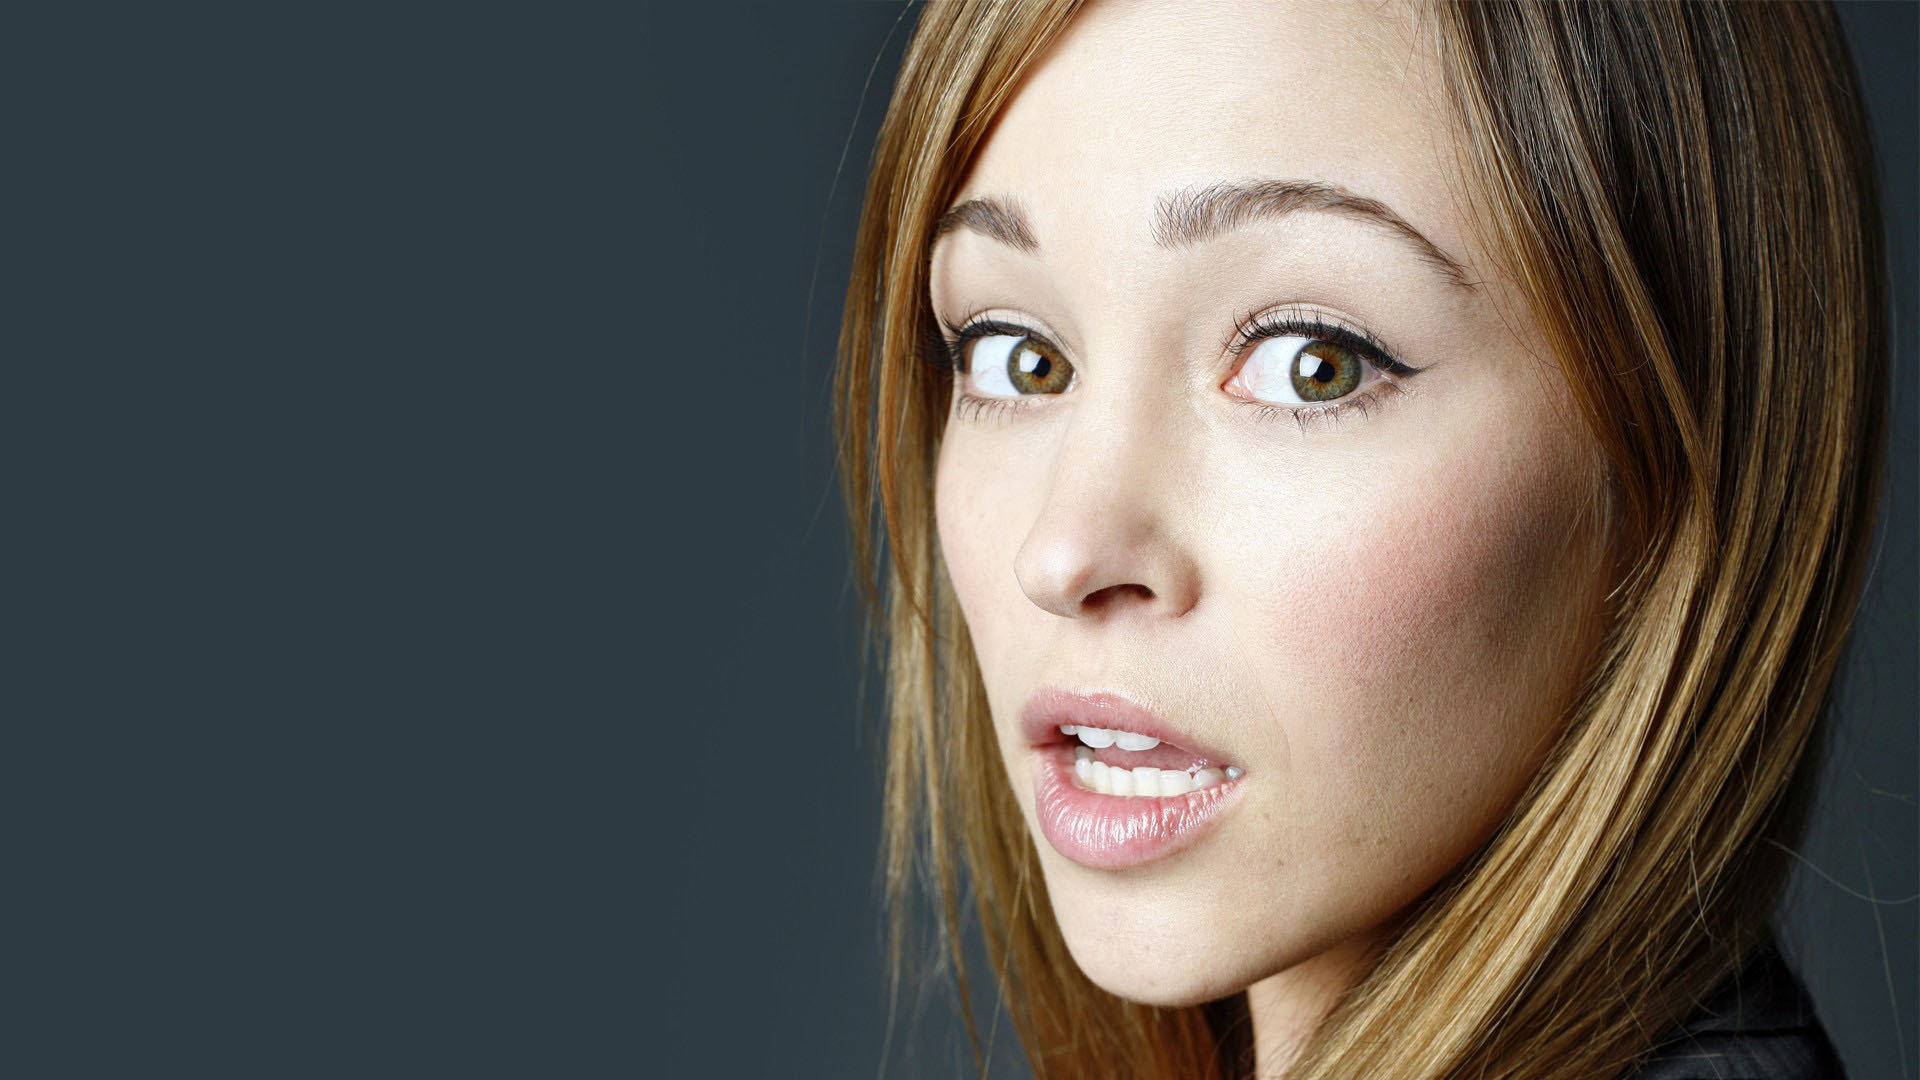 Free Autumn Reeser high quality wallpaper ID:73521 for hd 1080p PC